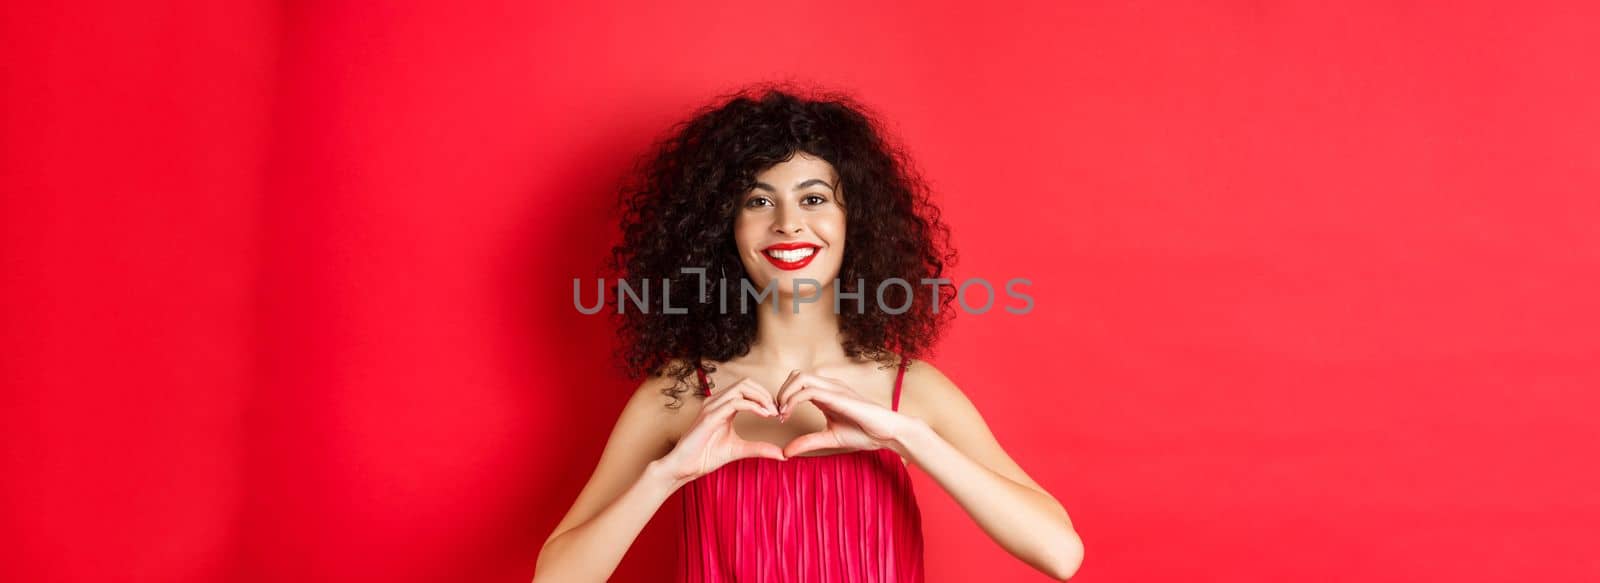 Valentines day. Romantic girl with curly hairstyle in evening dress, smiling and showing heart sign, say I love you on lovers holiday, standing over red background by Benzoix